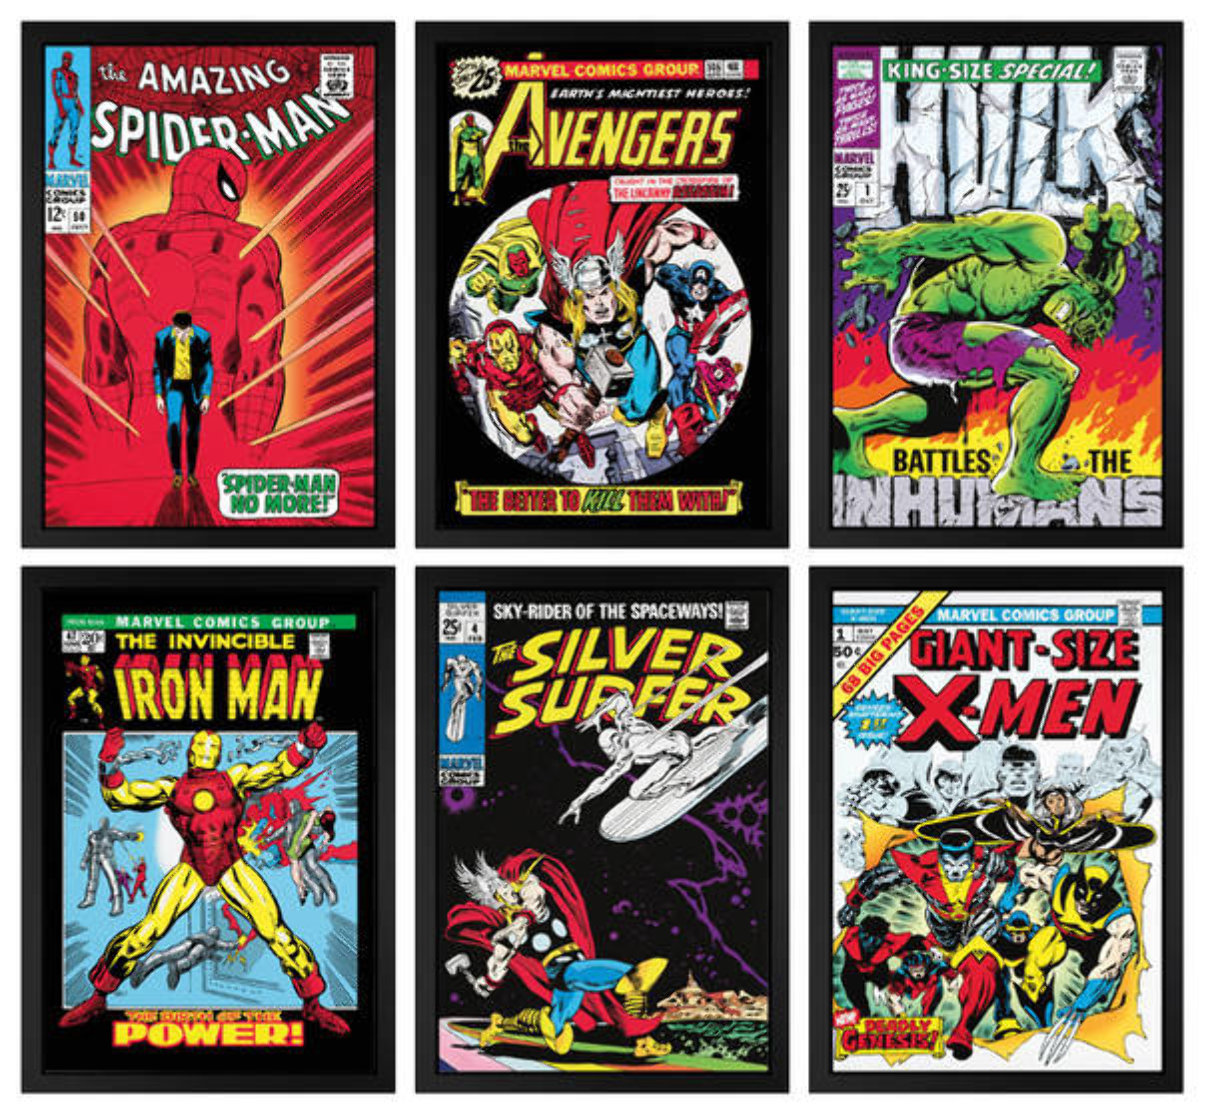 Marvel Superheroes Collection Set of 6 HS Limited Edition Print by Stan Lee